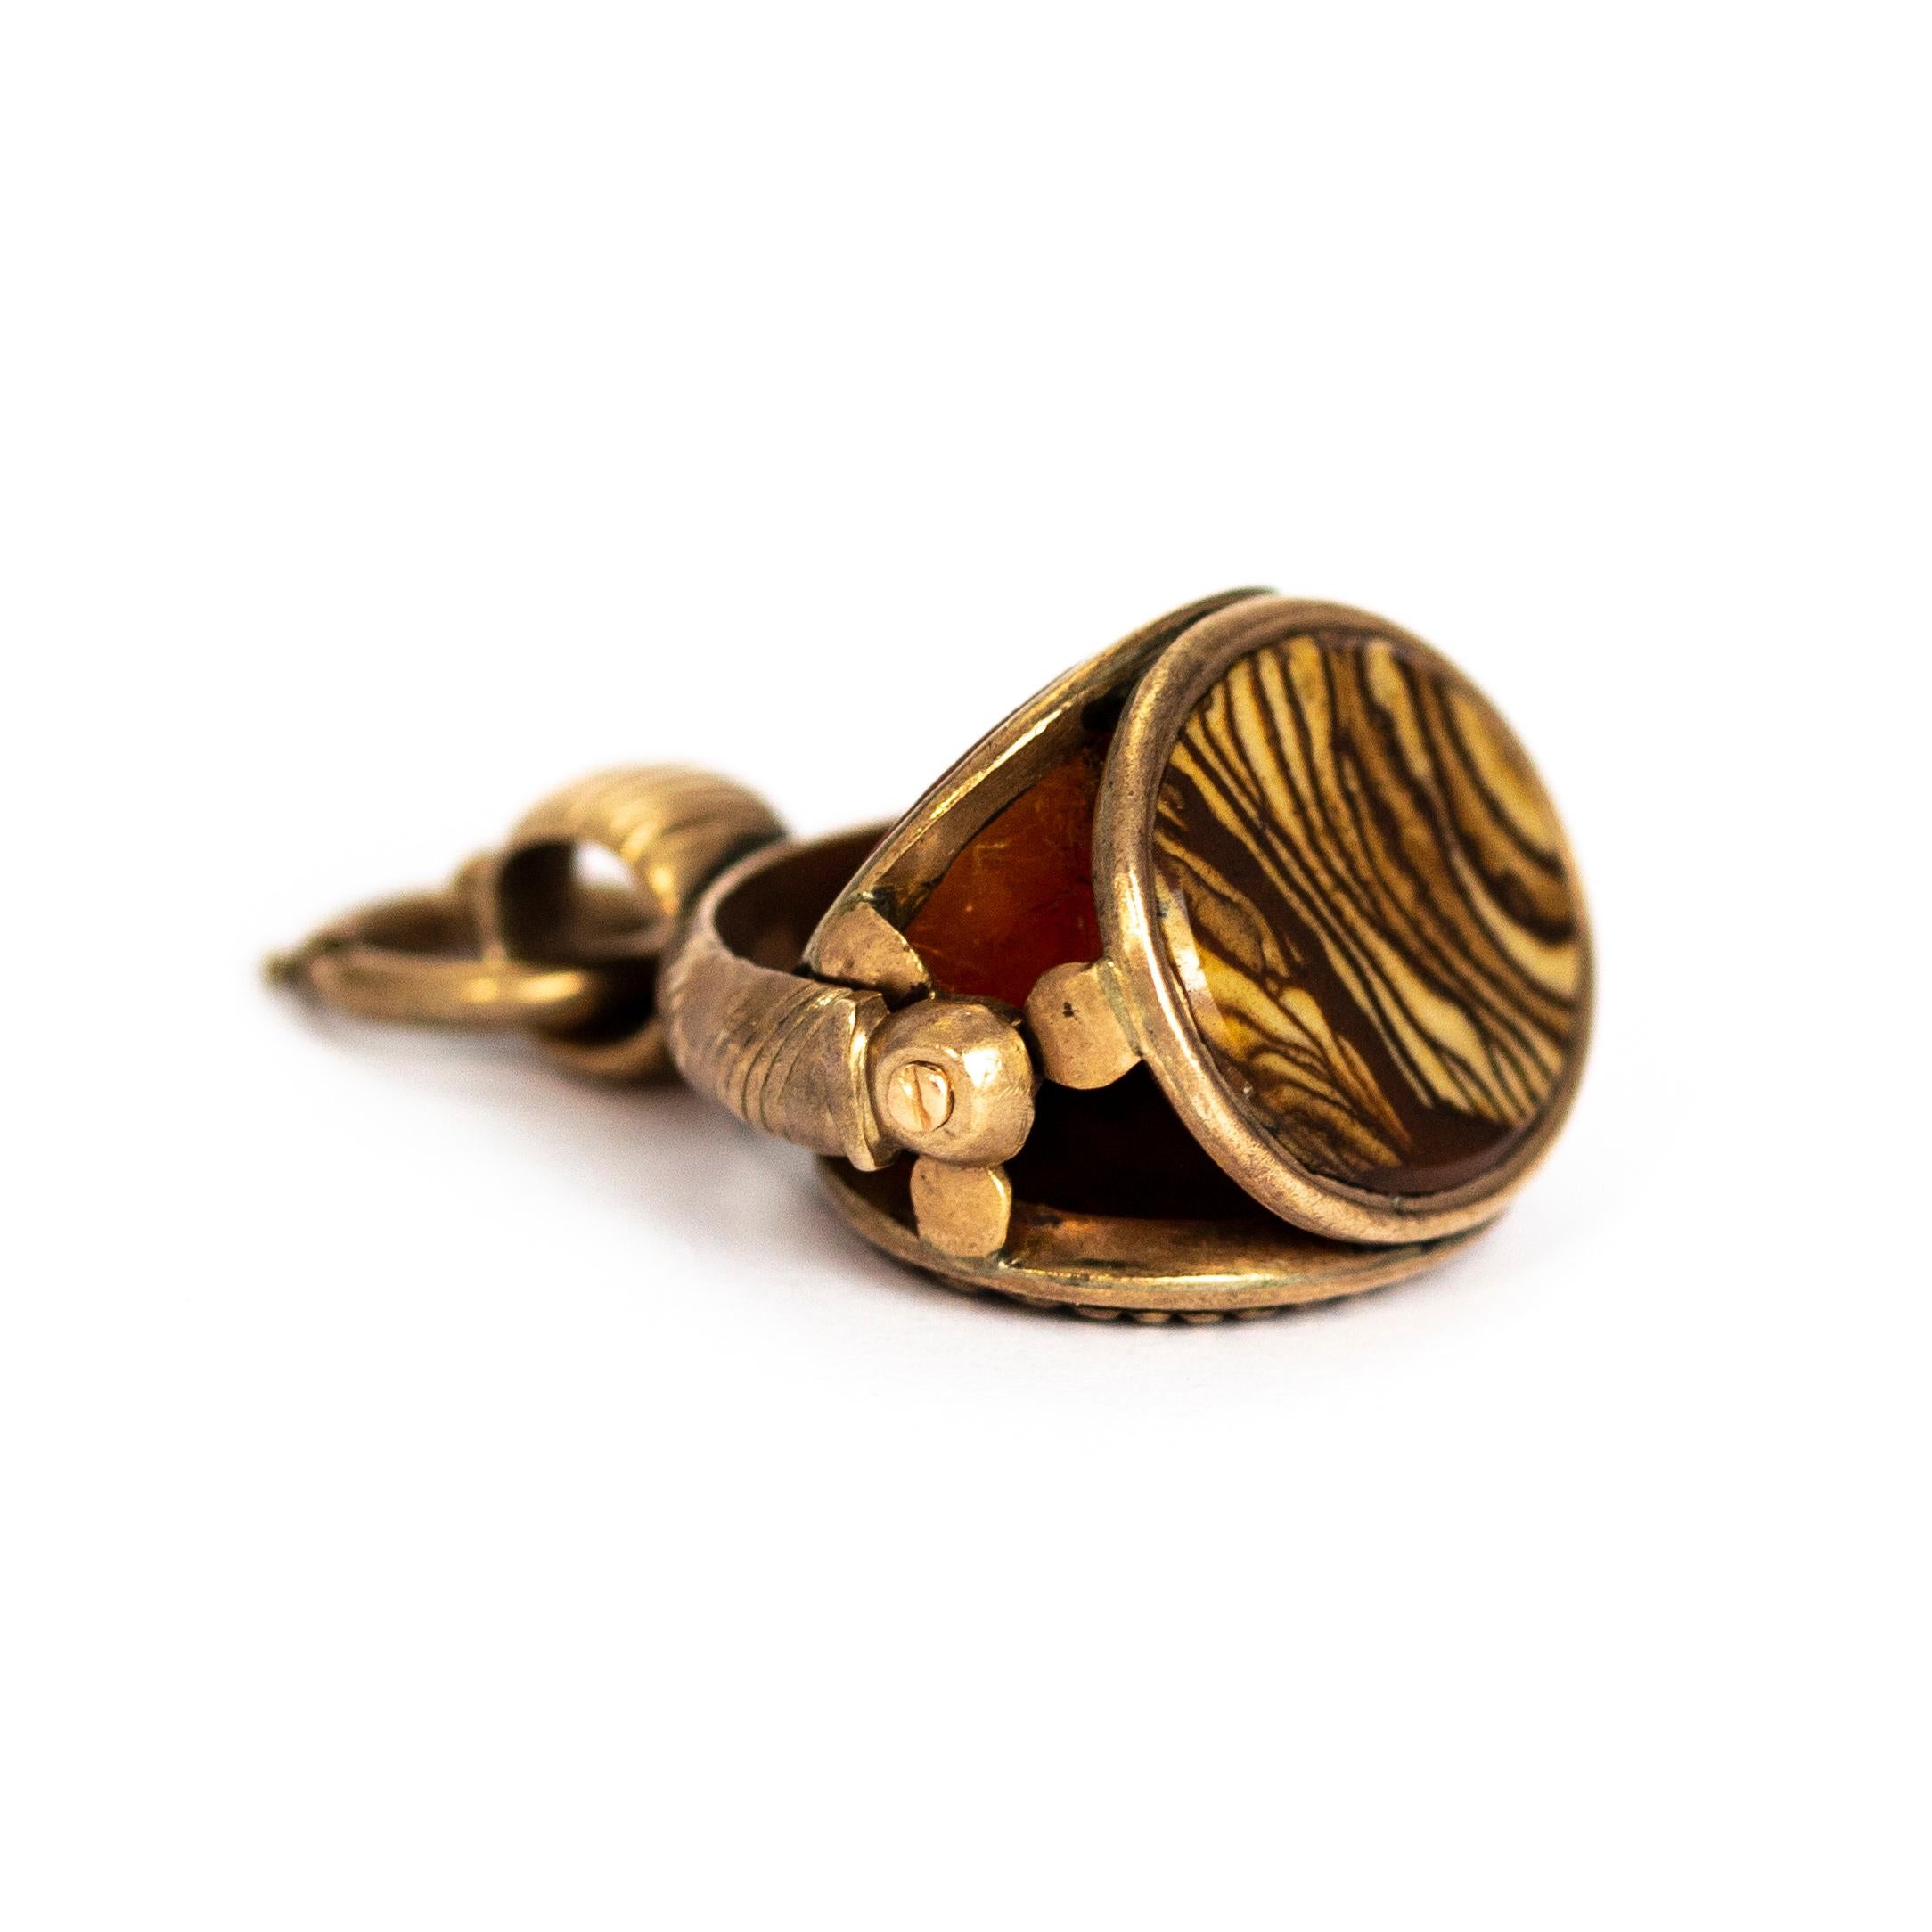 An elaborate Victorian fob pendant. Containing three oval sides of textured gold, striped agate, and carnelian forming a triple side swivelling fob. Which is pivoted beneath an textured arch and pendant loop. Modelled in 9 karat yellow